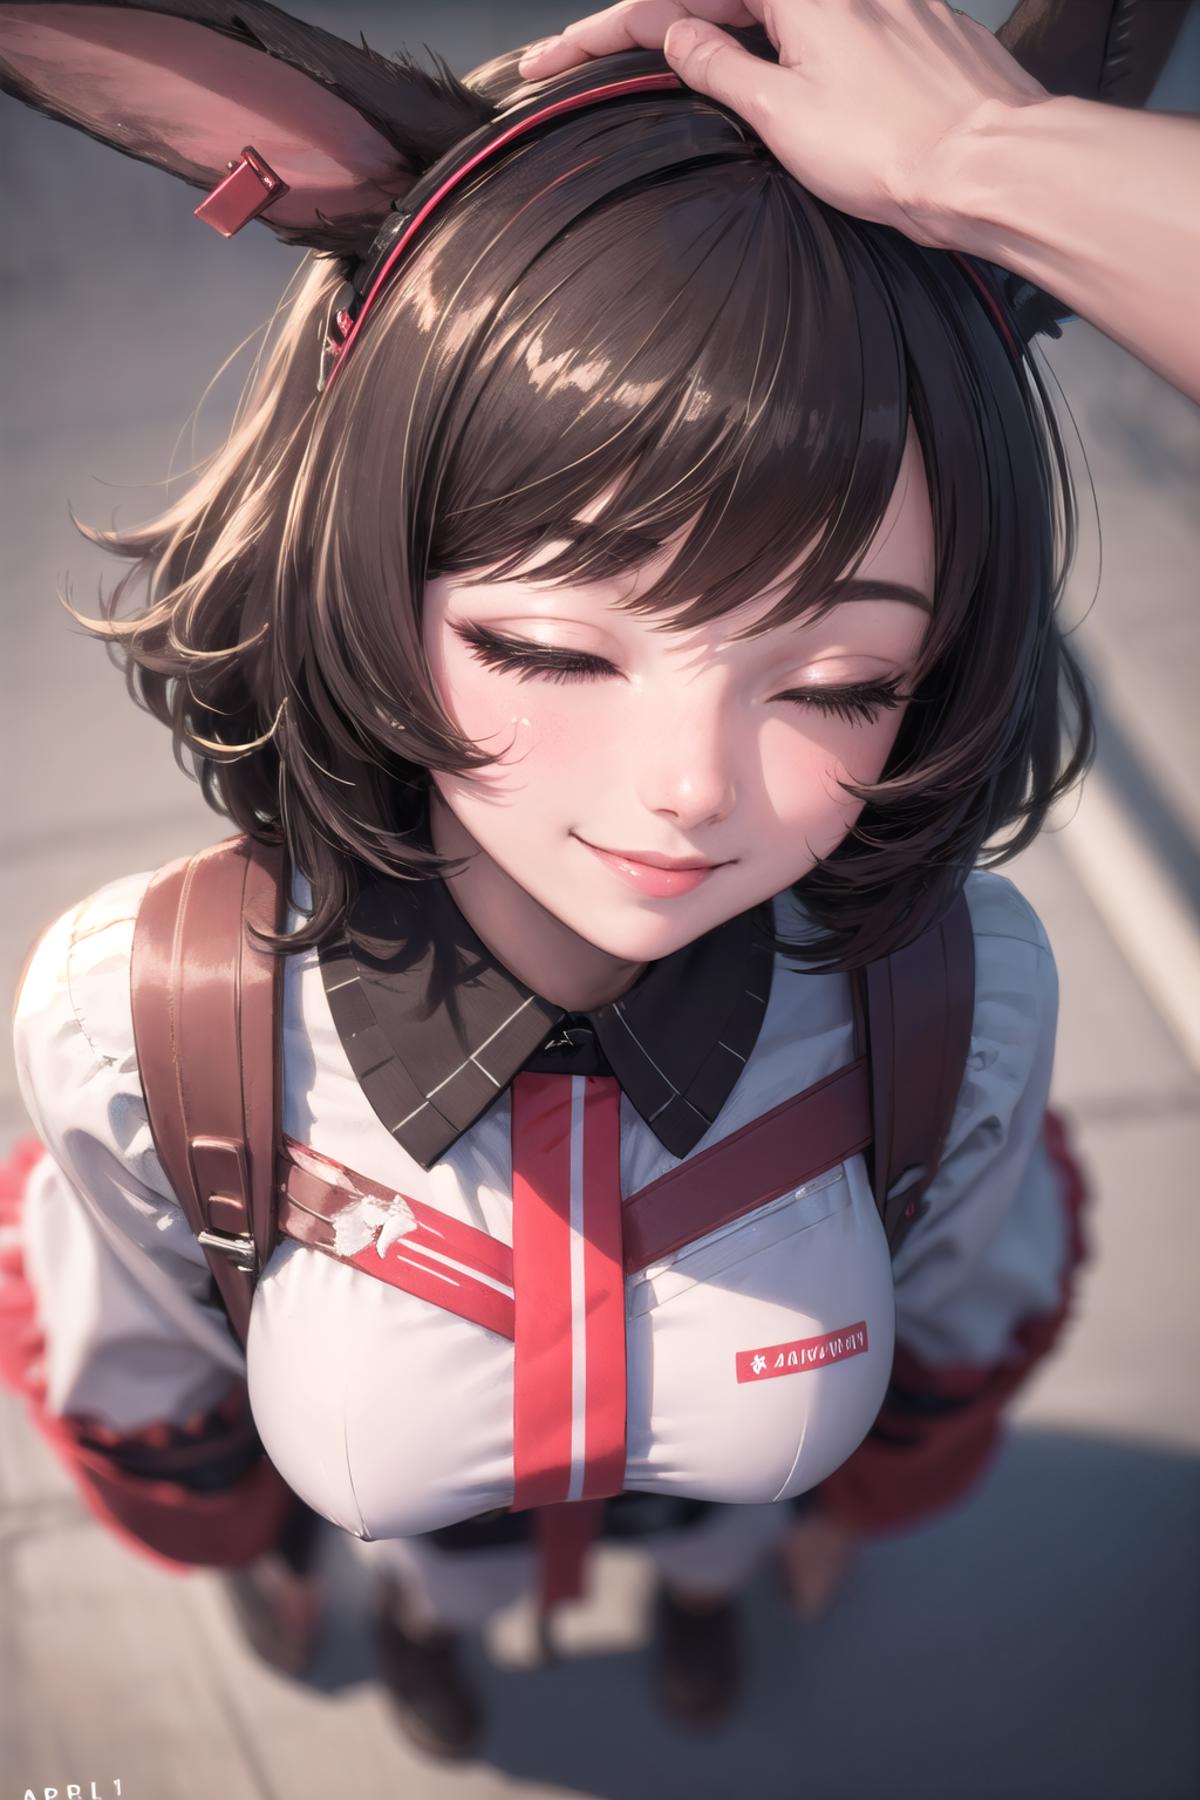 Headpat POV | Concept LoRA image by wrench1815